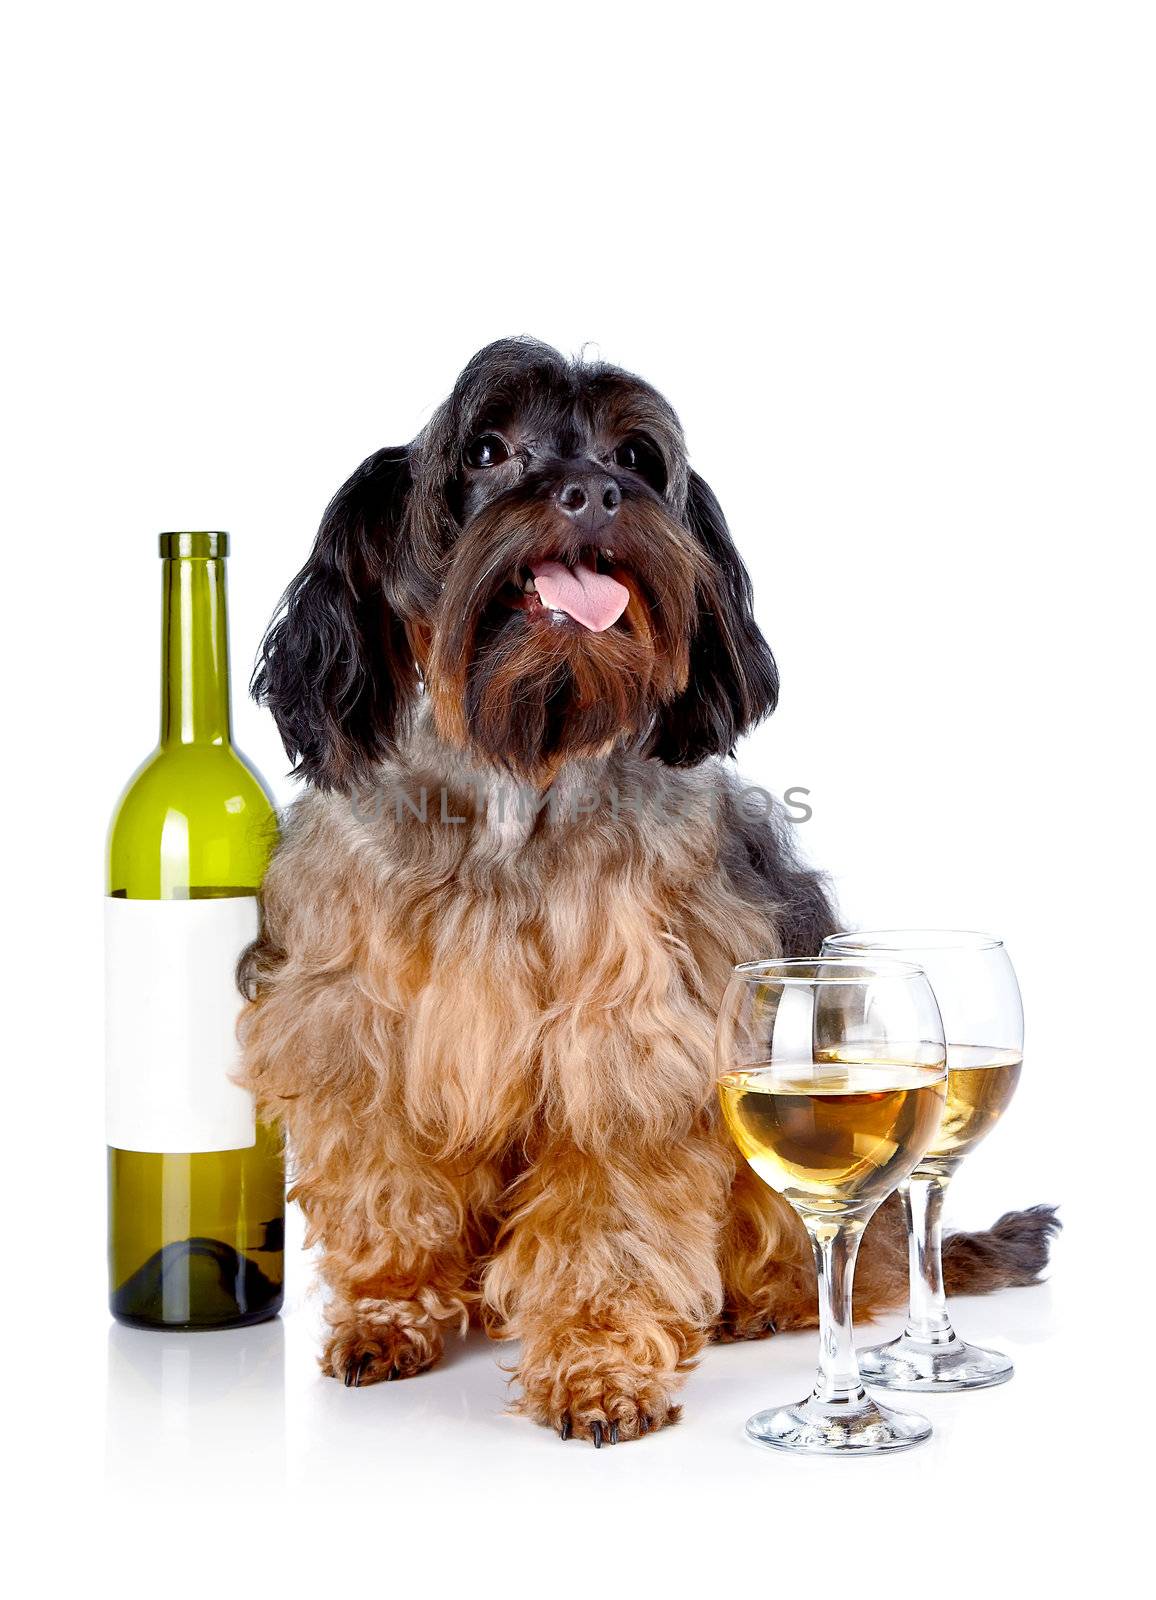 Decorative dog with a bottle of wine and glasses by Azaliya